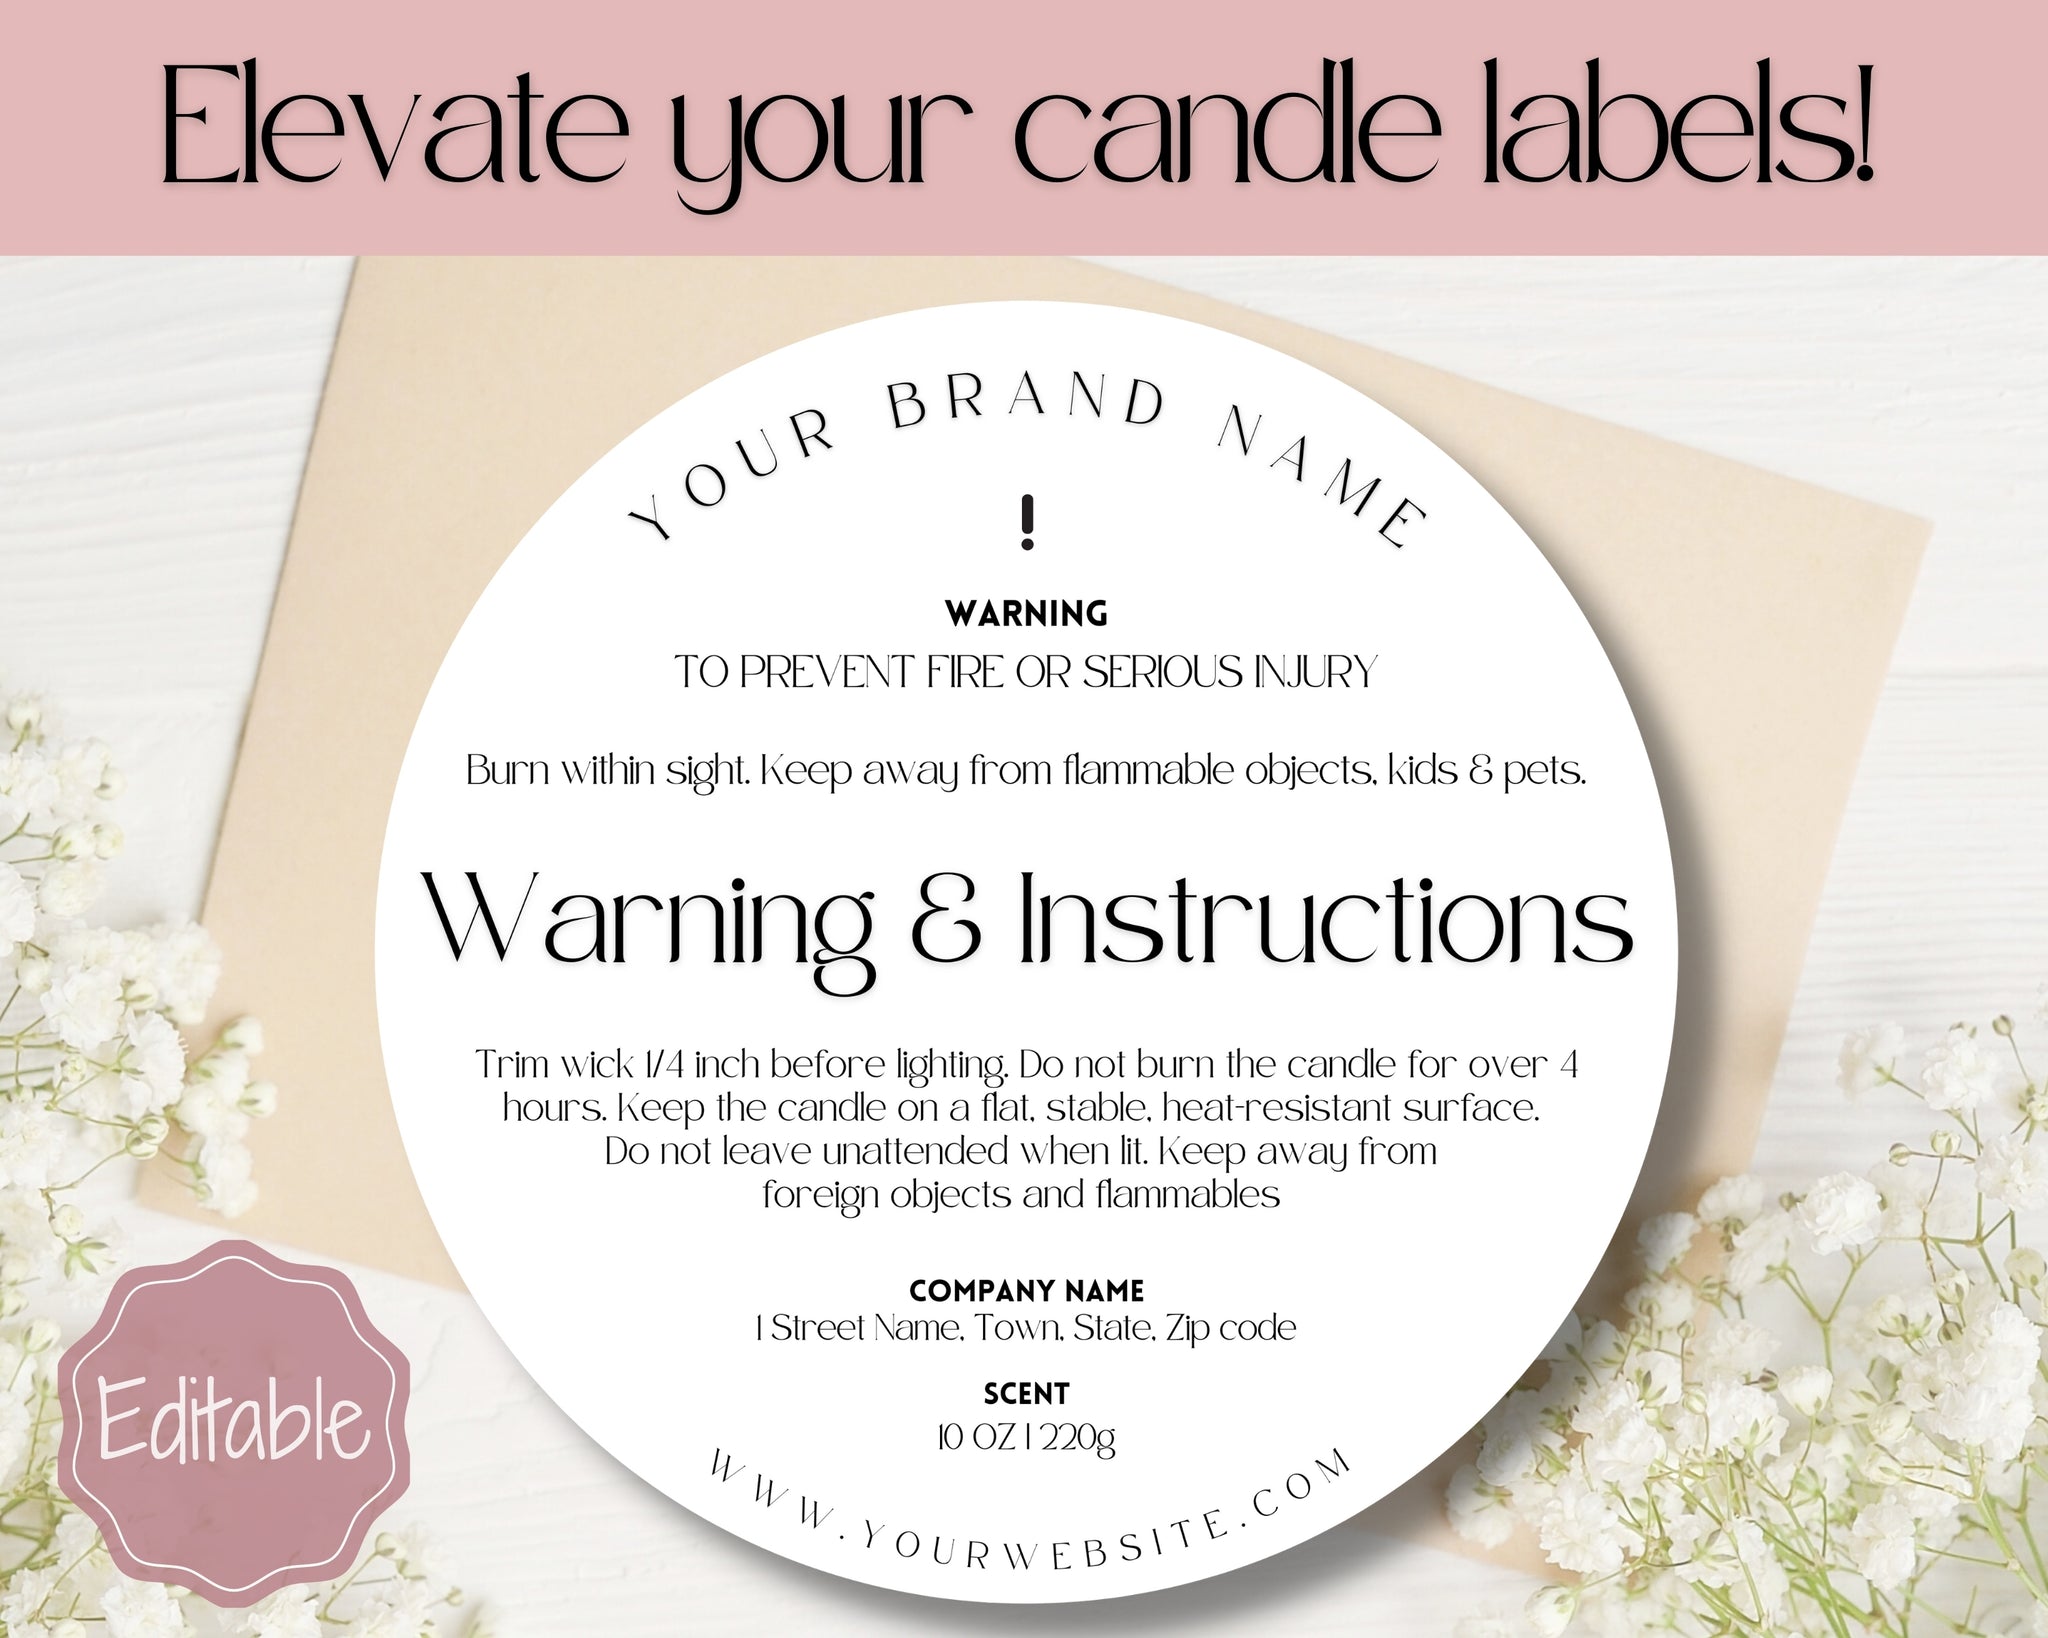 Candle Warning Label Template Editable Candle Safety Label Circle